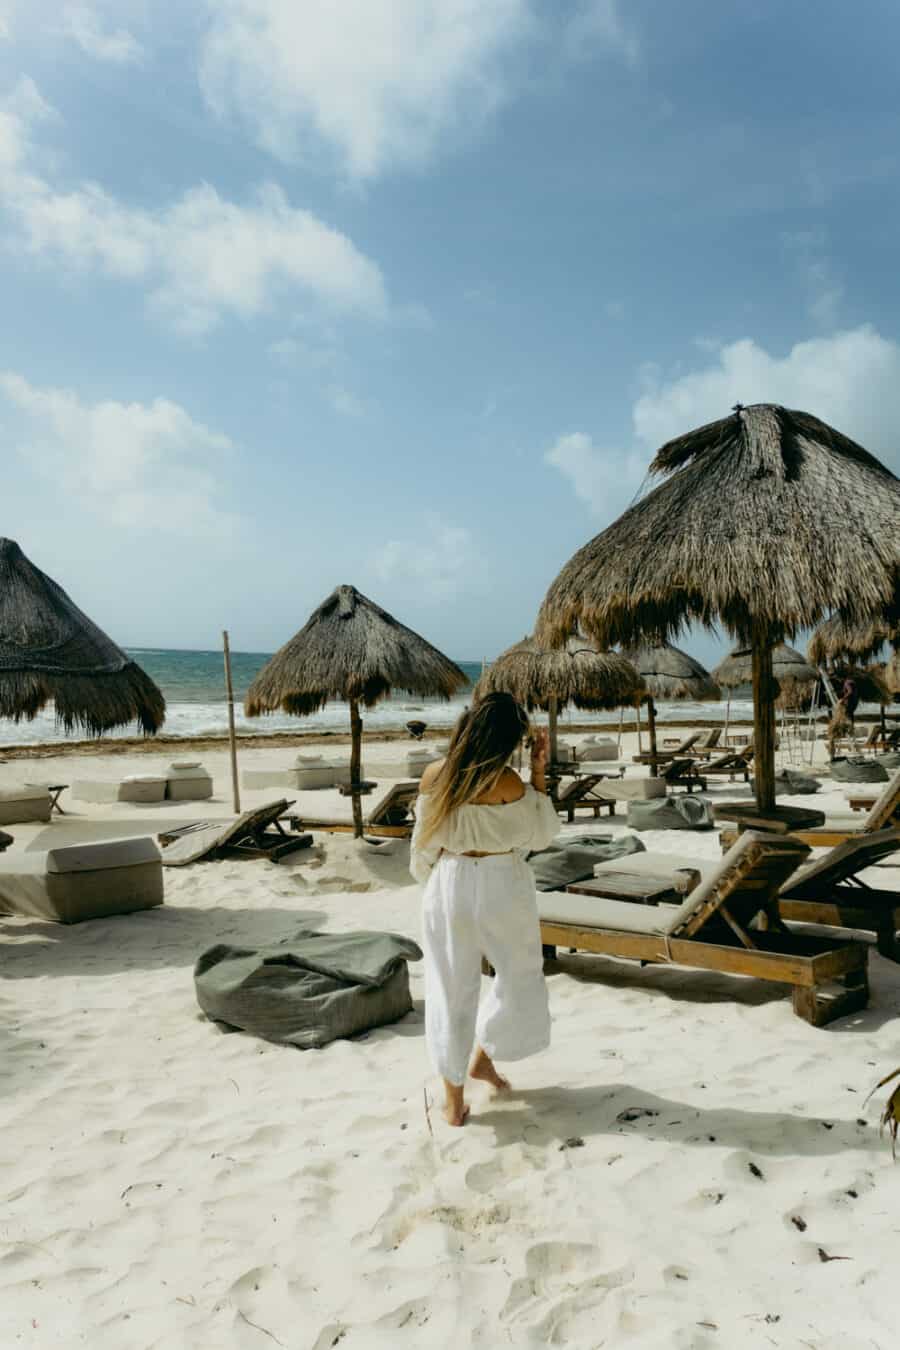 Coco Tran — Aesthetic Travel Blog By Film Photographer Coco Tran https://cocotran.com/cancun-to-tulum/